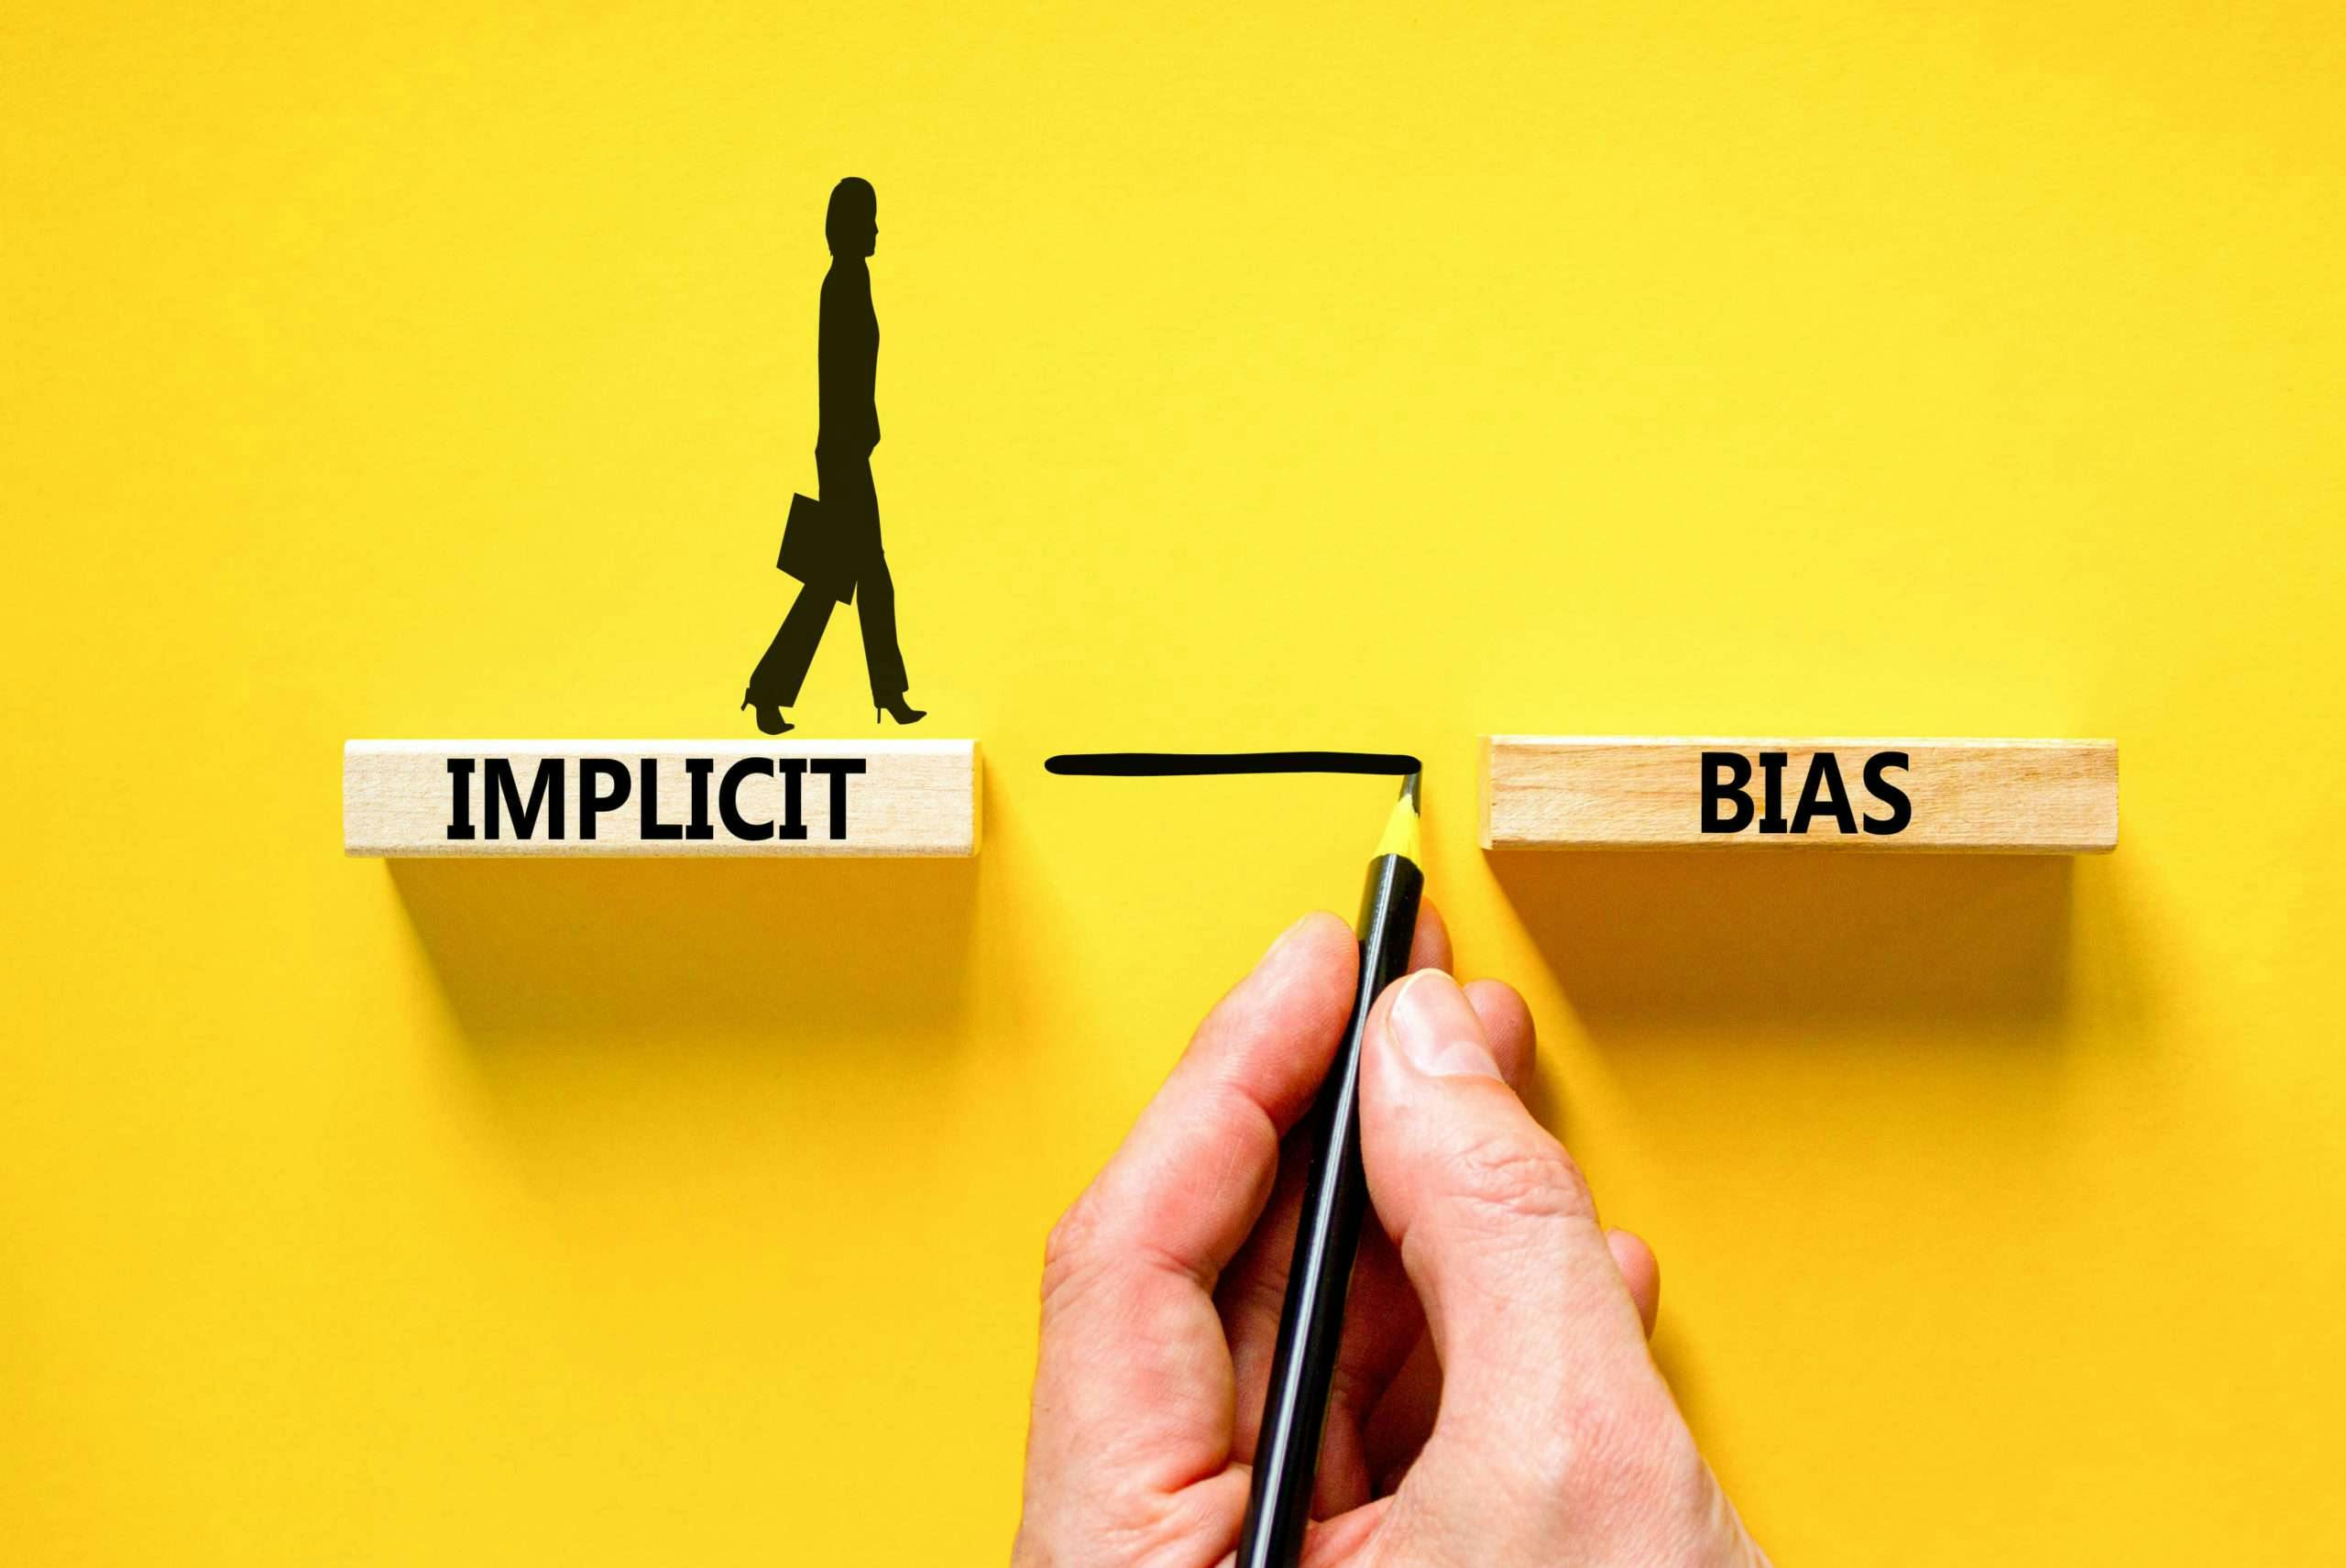 Implicit Bias: What Is It?